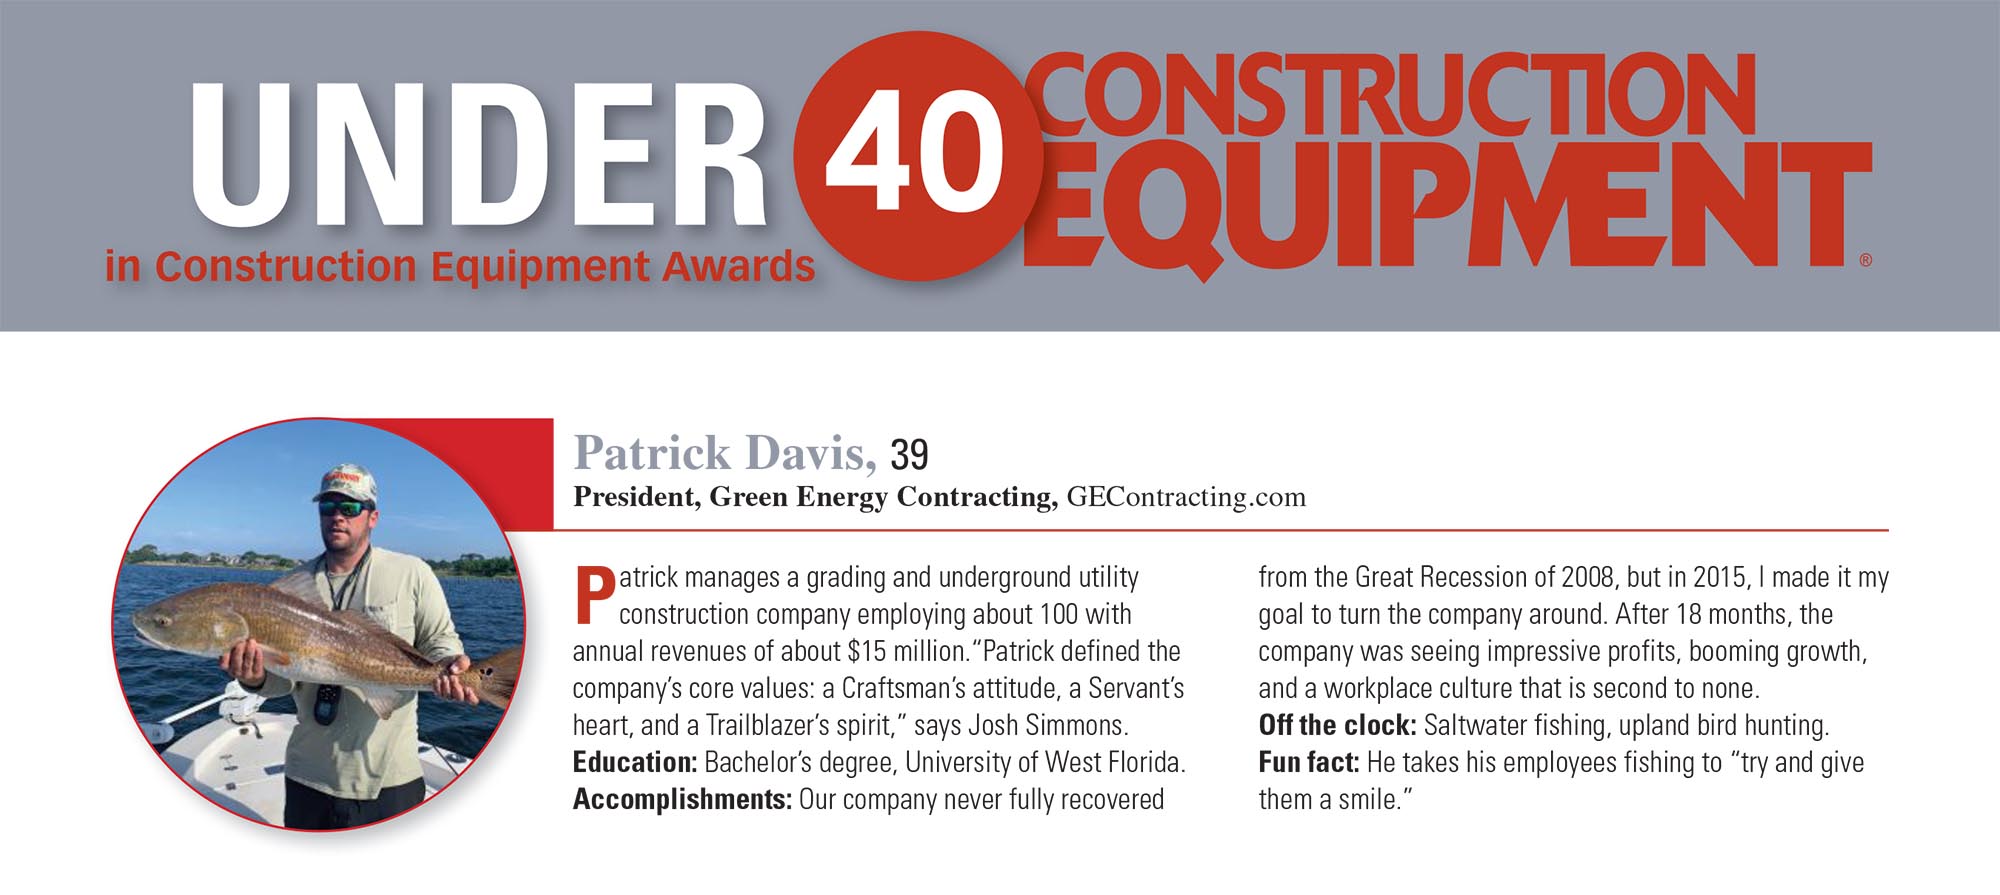 Excerpt from Construction Equipment magazine. Detailed text description for screen readers to follow: